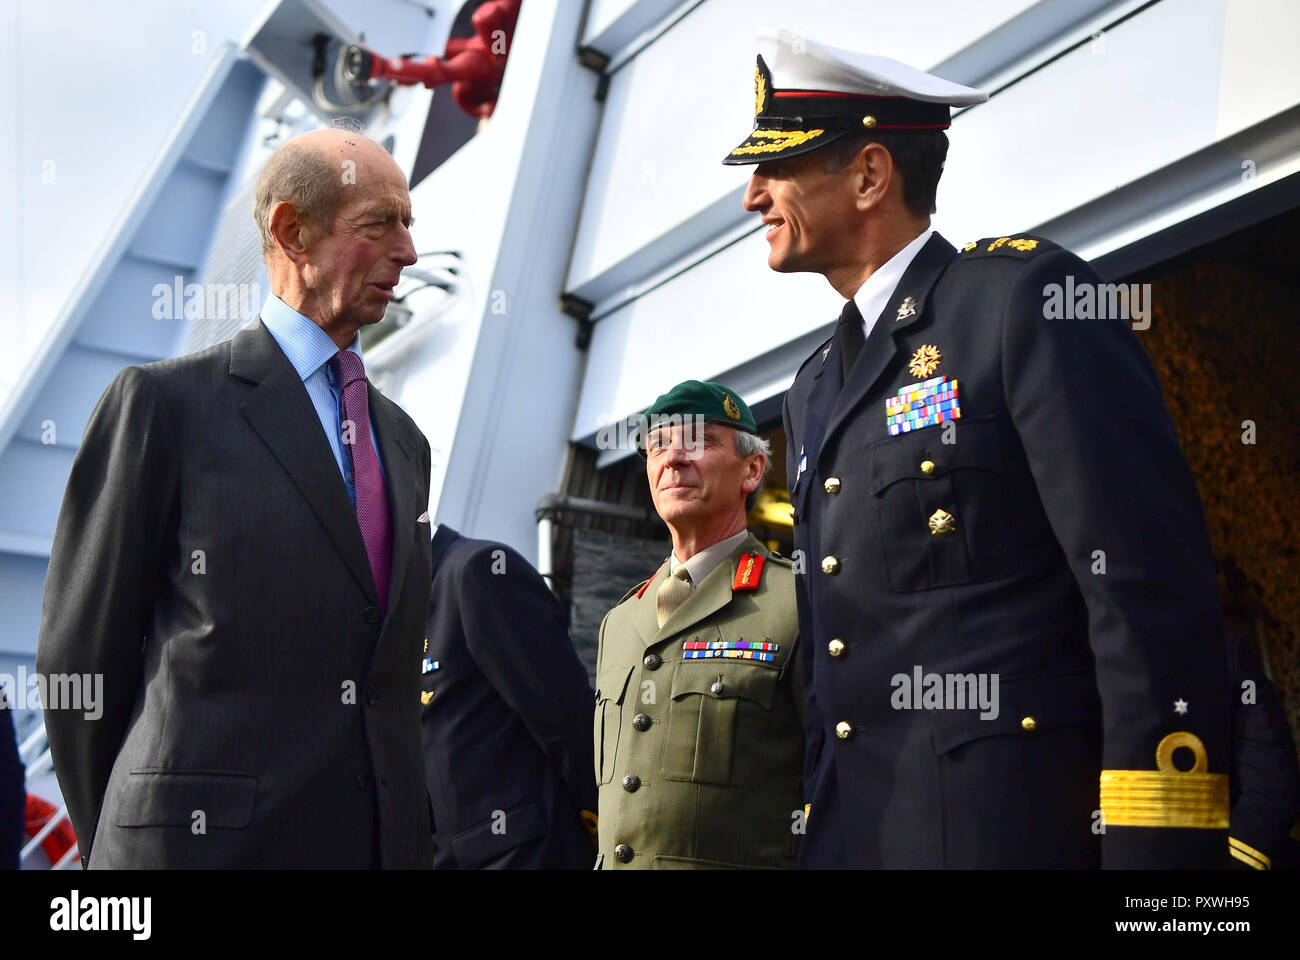 The Duke of Kent (left) during a visit by King Willem-Alexander and Queen Maxima of the Netherlands to HMS Belfast for an on-the-water capability demonstration between the Royal Netherlands Marine Corps and the Royal Marines. Stock Photo